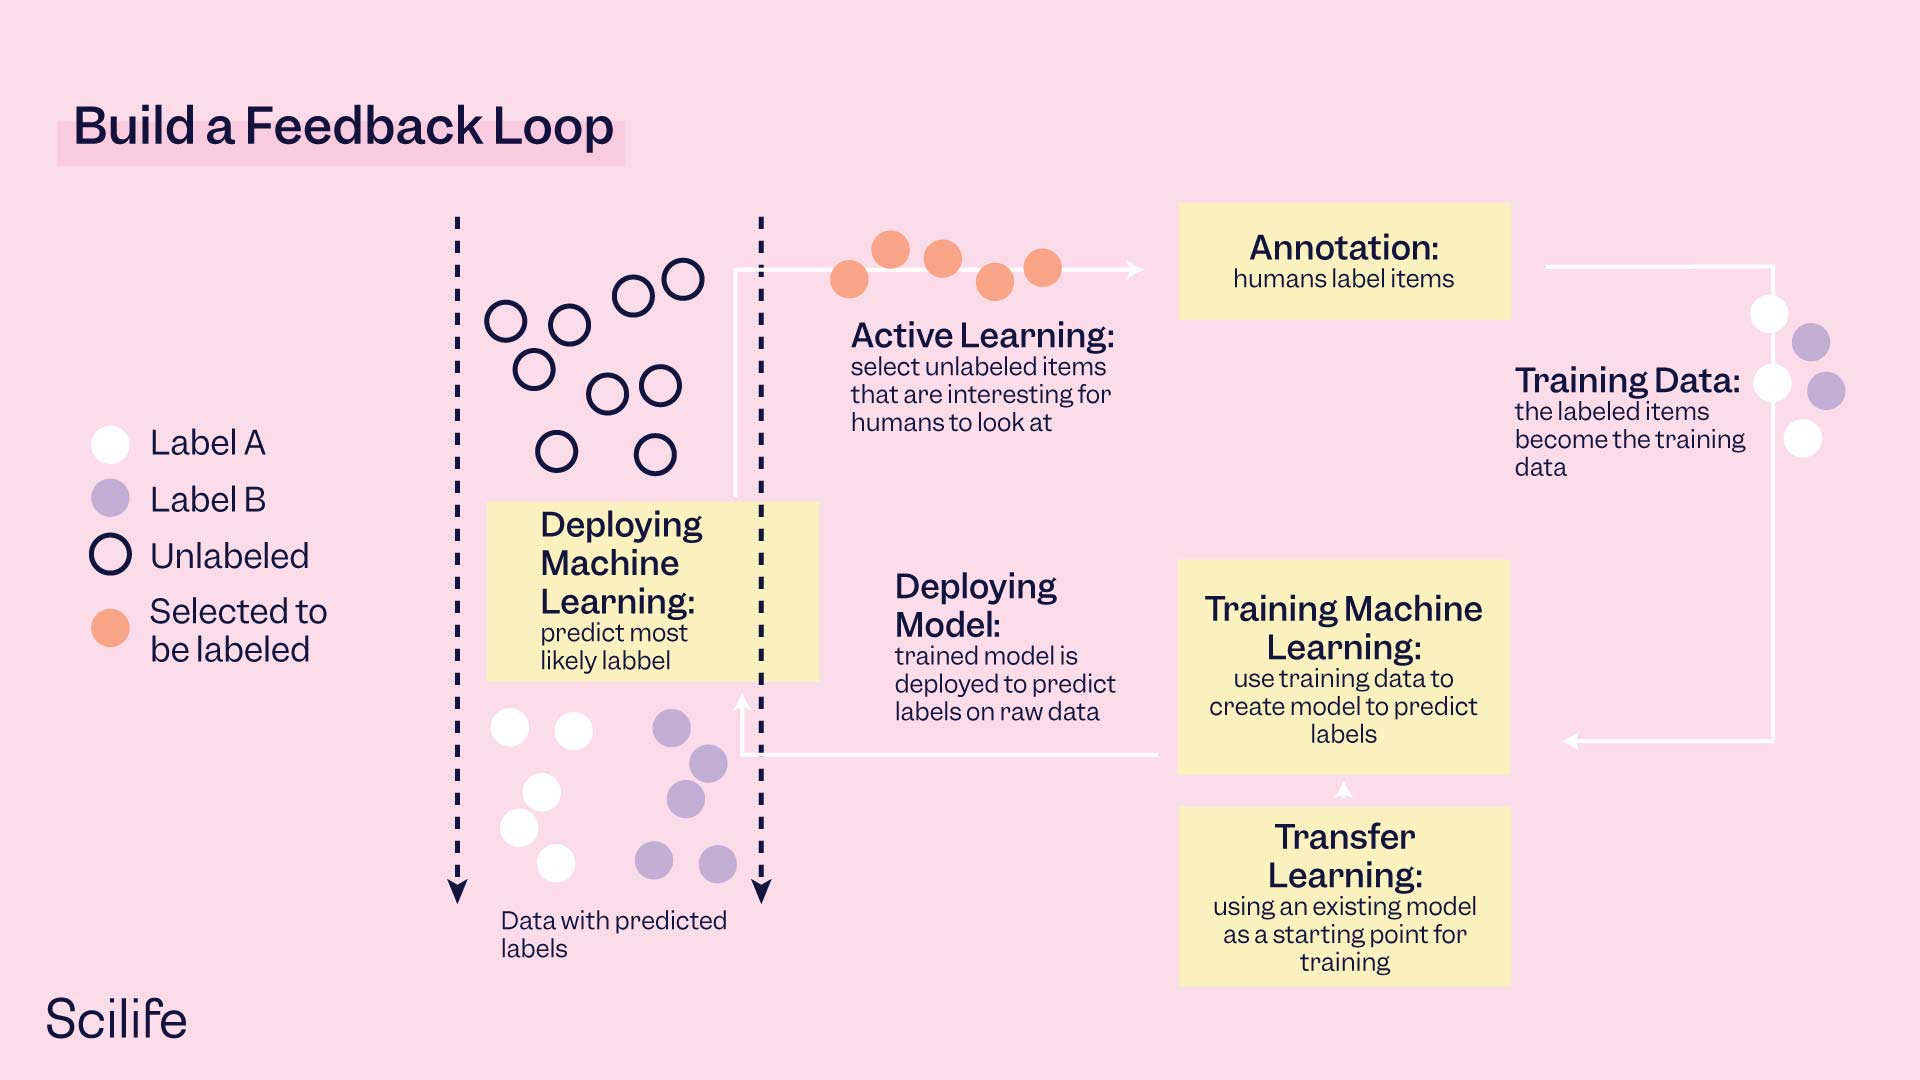 Infographic that shows how to build a feedback loop using Natural Language Processing techniques | Scilife 